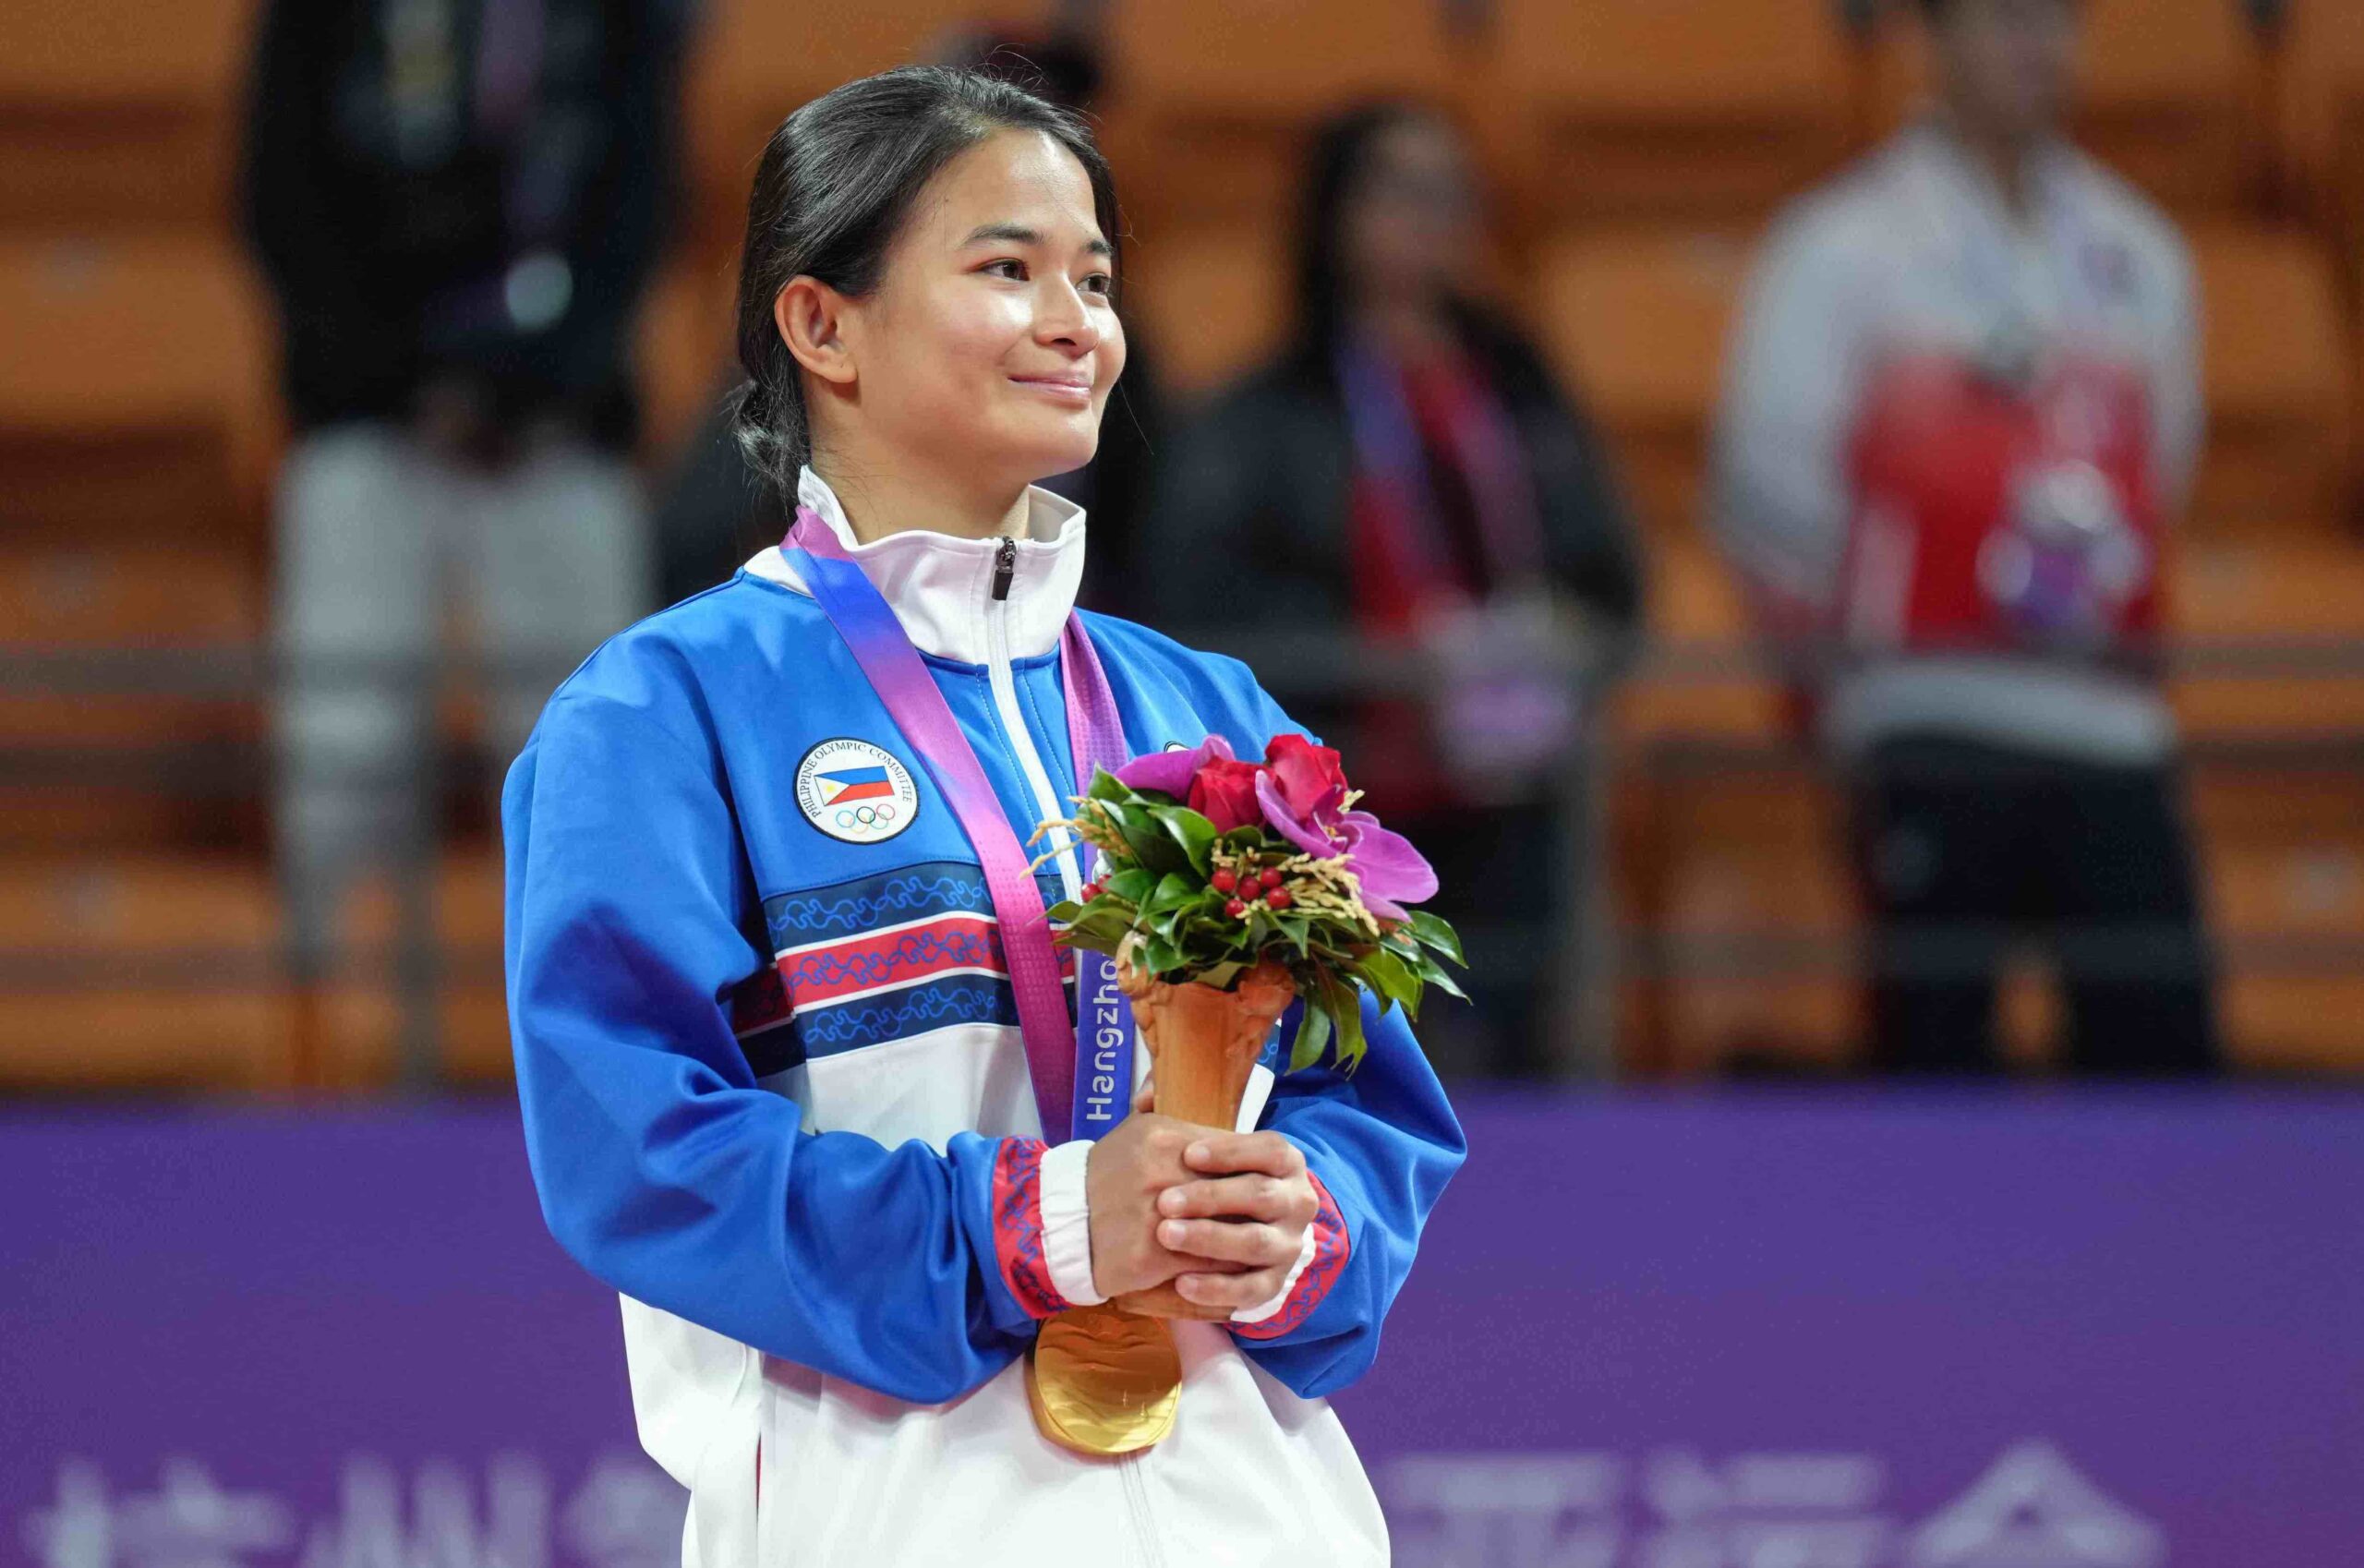 Gold medalists for the Philippines at the 19th Asian Games in China: Meggie Ochoa (Women's Jiu-Jitsu)